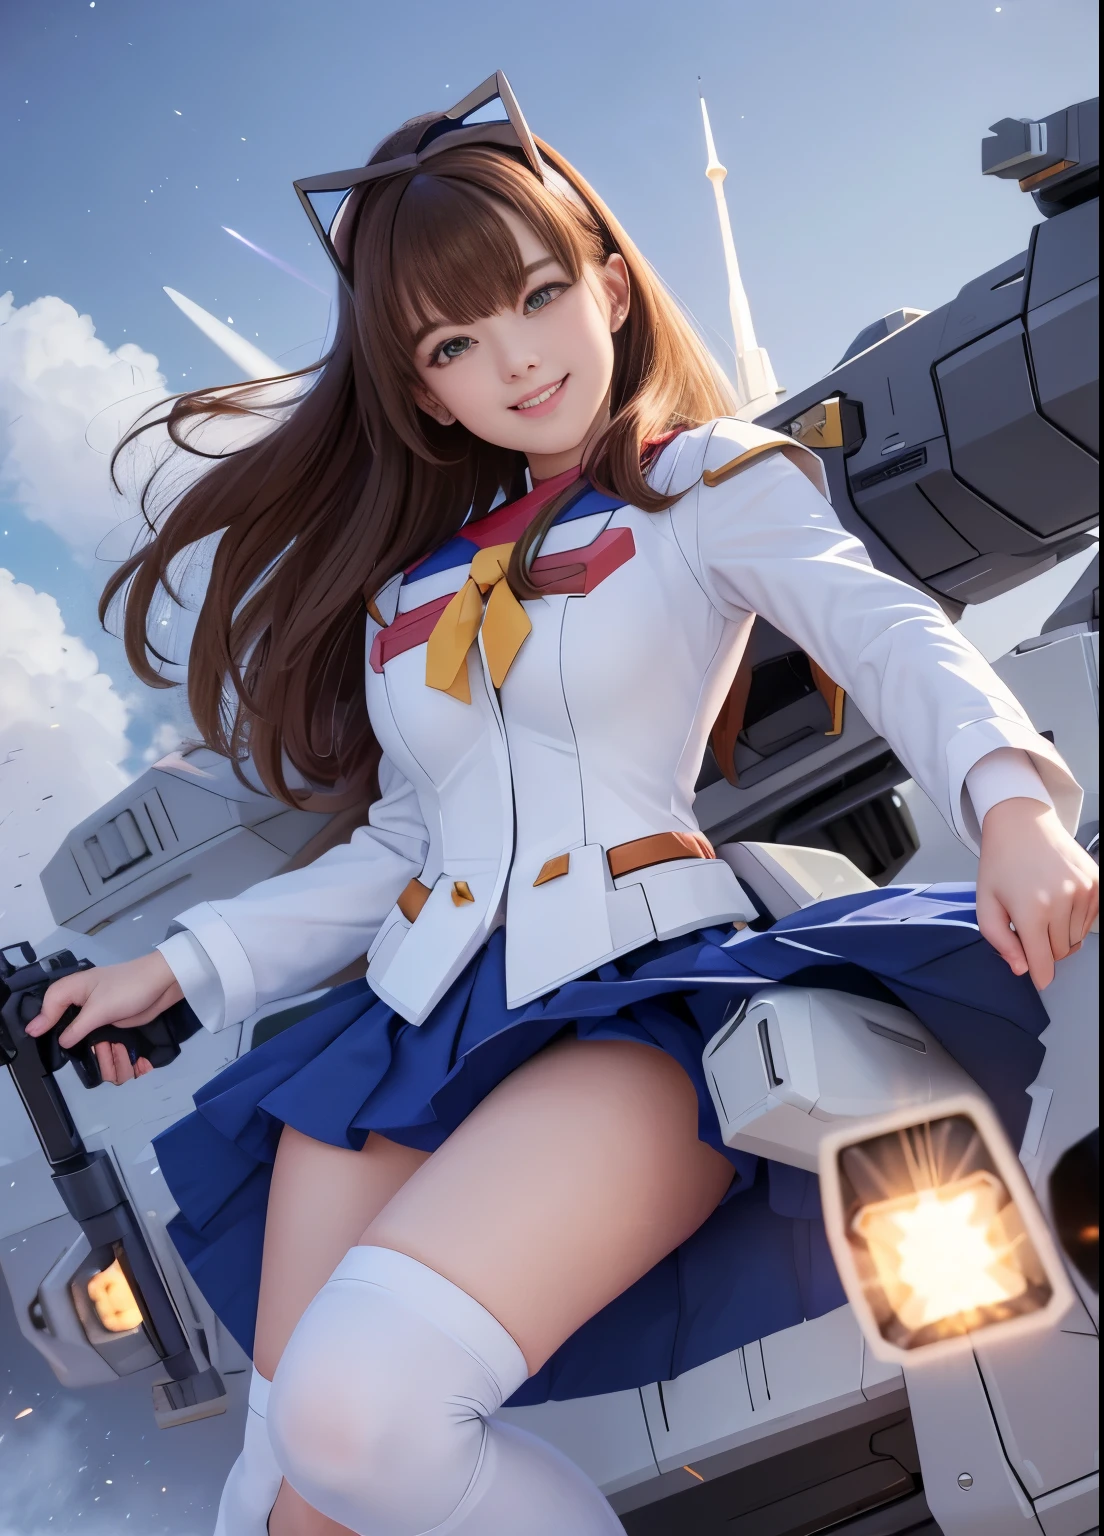 (highest quality), (masterpiece), Mobile Suit Gundam F91 personification, Browsing Caution, Great highlights on the upper body, Powerful Mech, Beam rifle,  Girl, 21 years old, Baby Face, Beautiful Eyes, Modest nose, Neat, smile, Absolute area, Moist、Slightly thick thighs, Short skirt, Leg spread, whole body, universe, Battle scene with enemy,